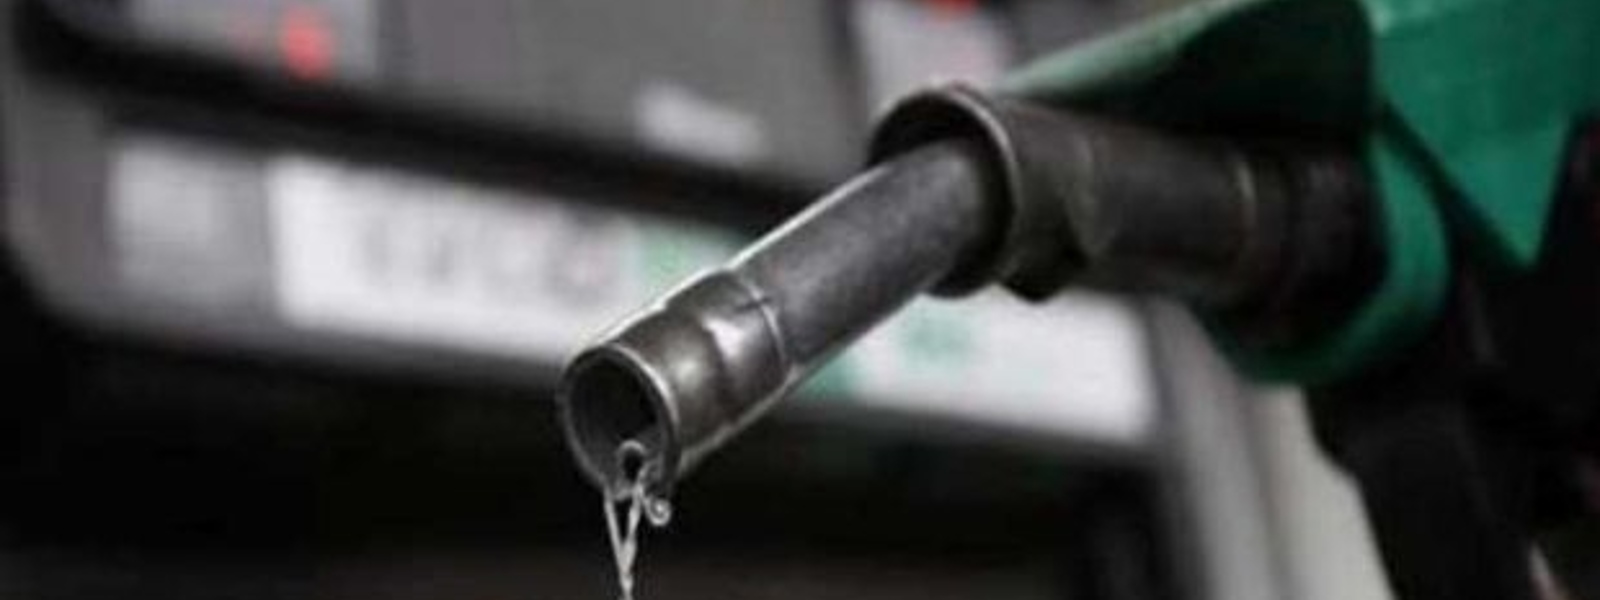 Fuel prices increased to address forex issues